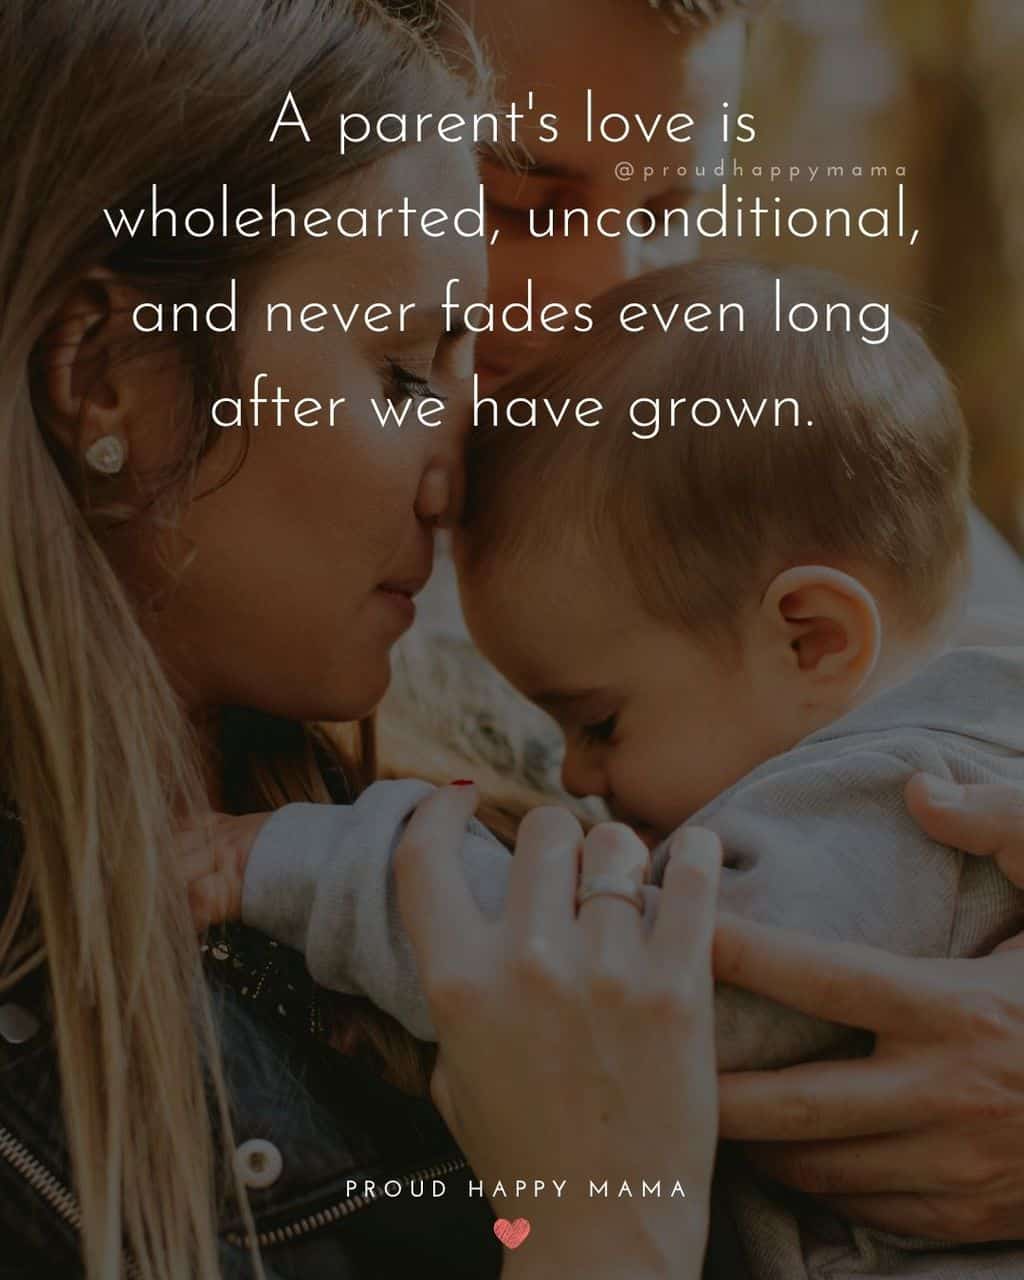 180 Quotes About Parents And Their Love (With Images)